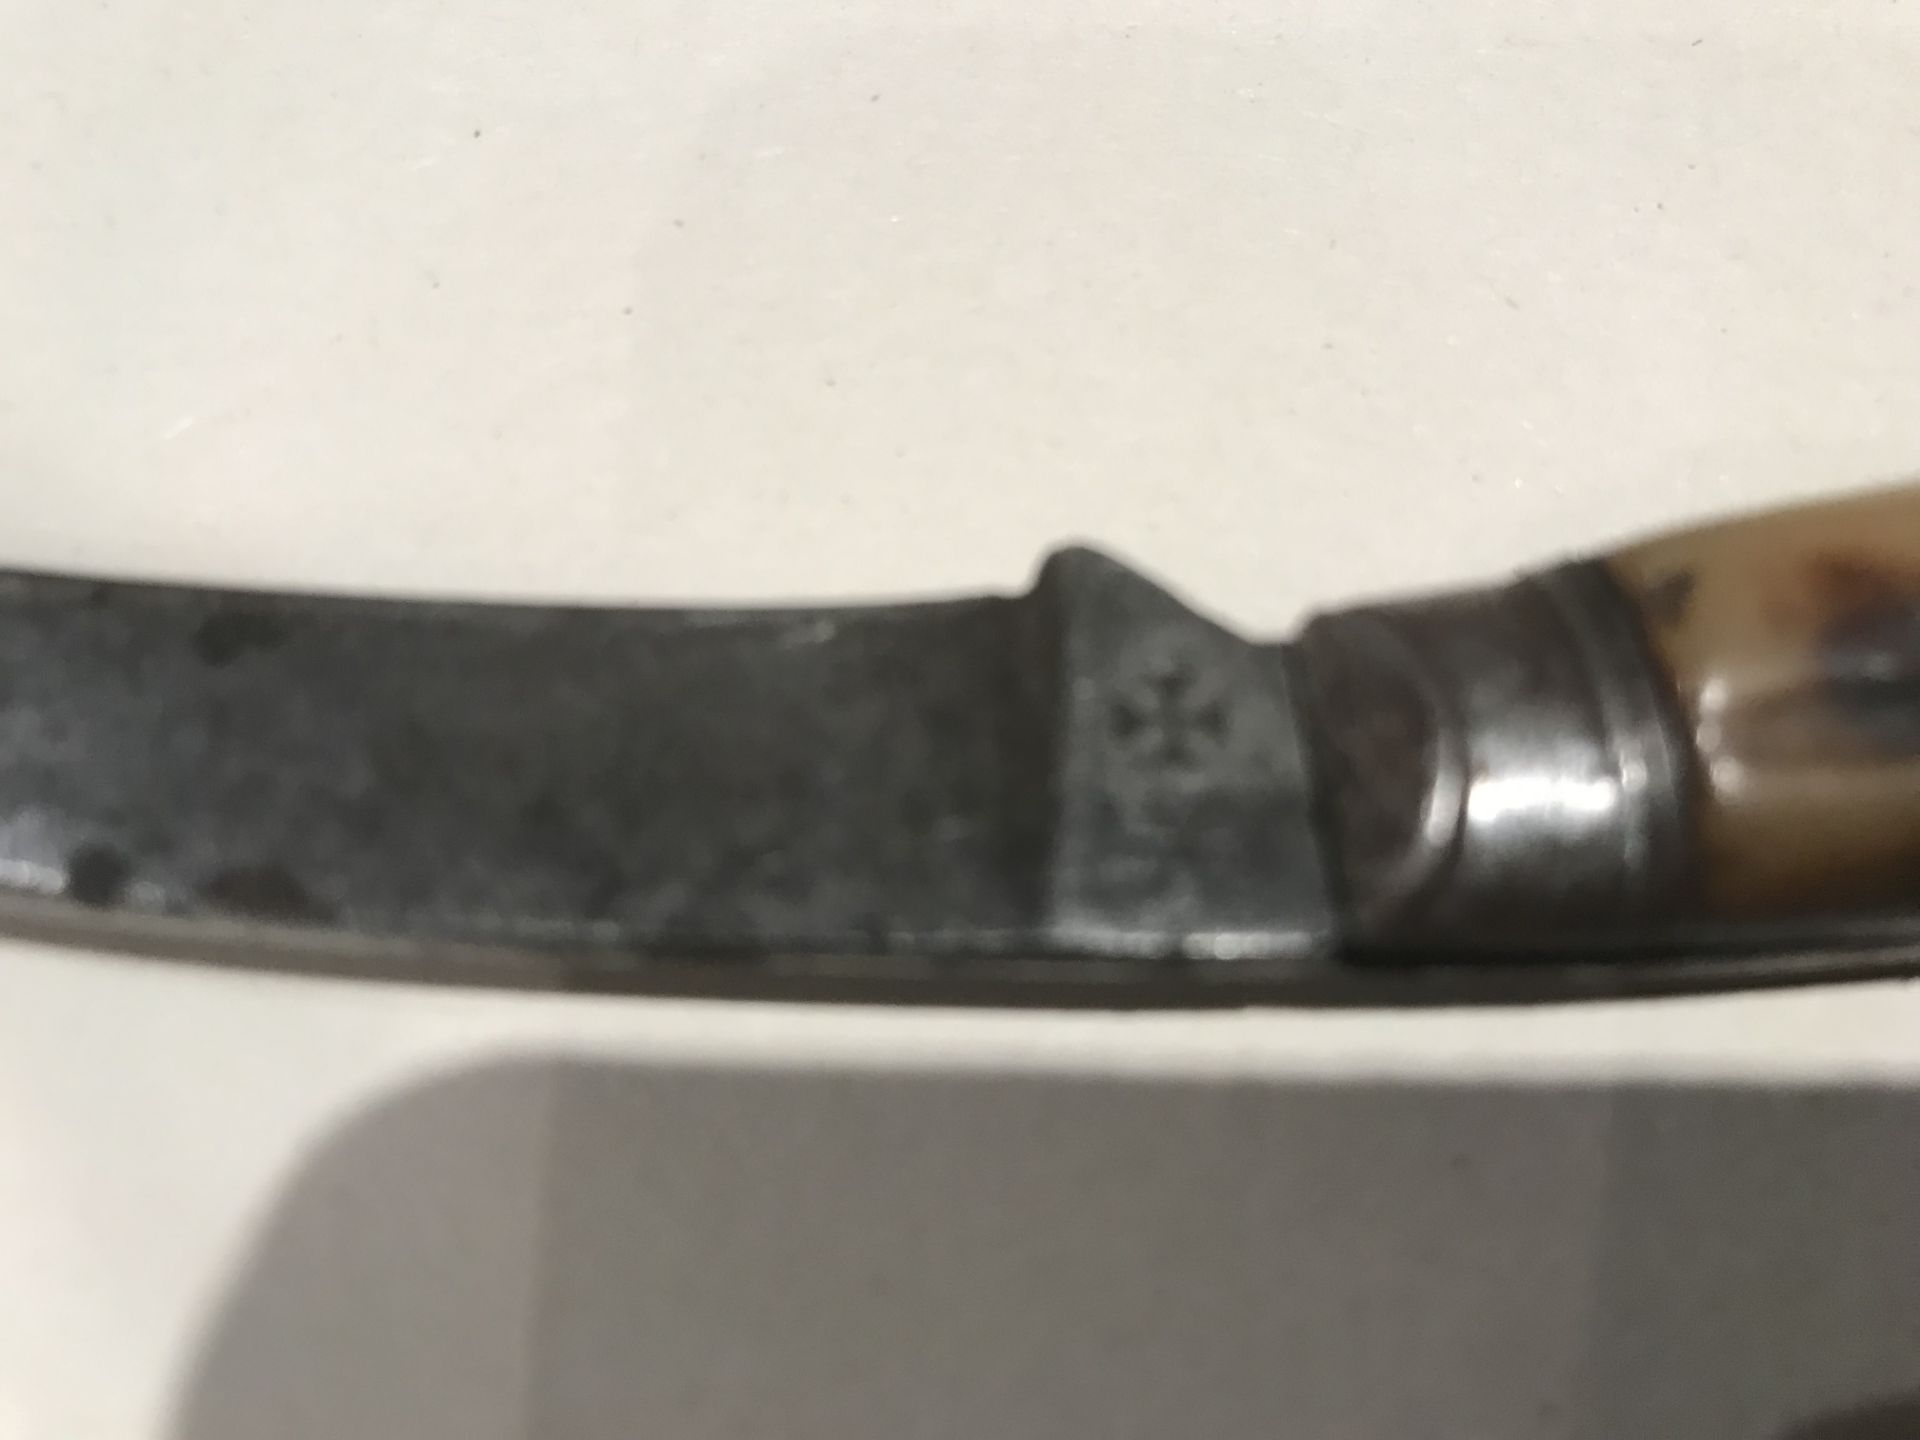 Joseph & Rodgers stag handle knife - Image 3 of 3